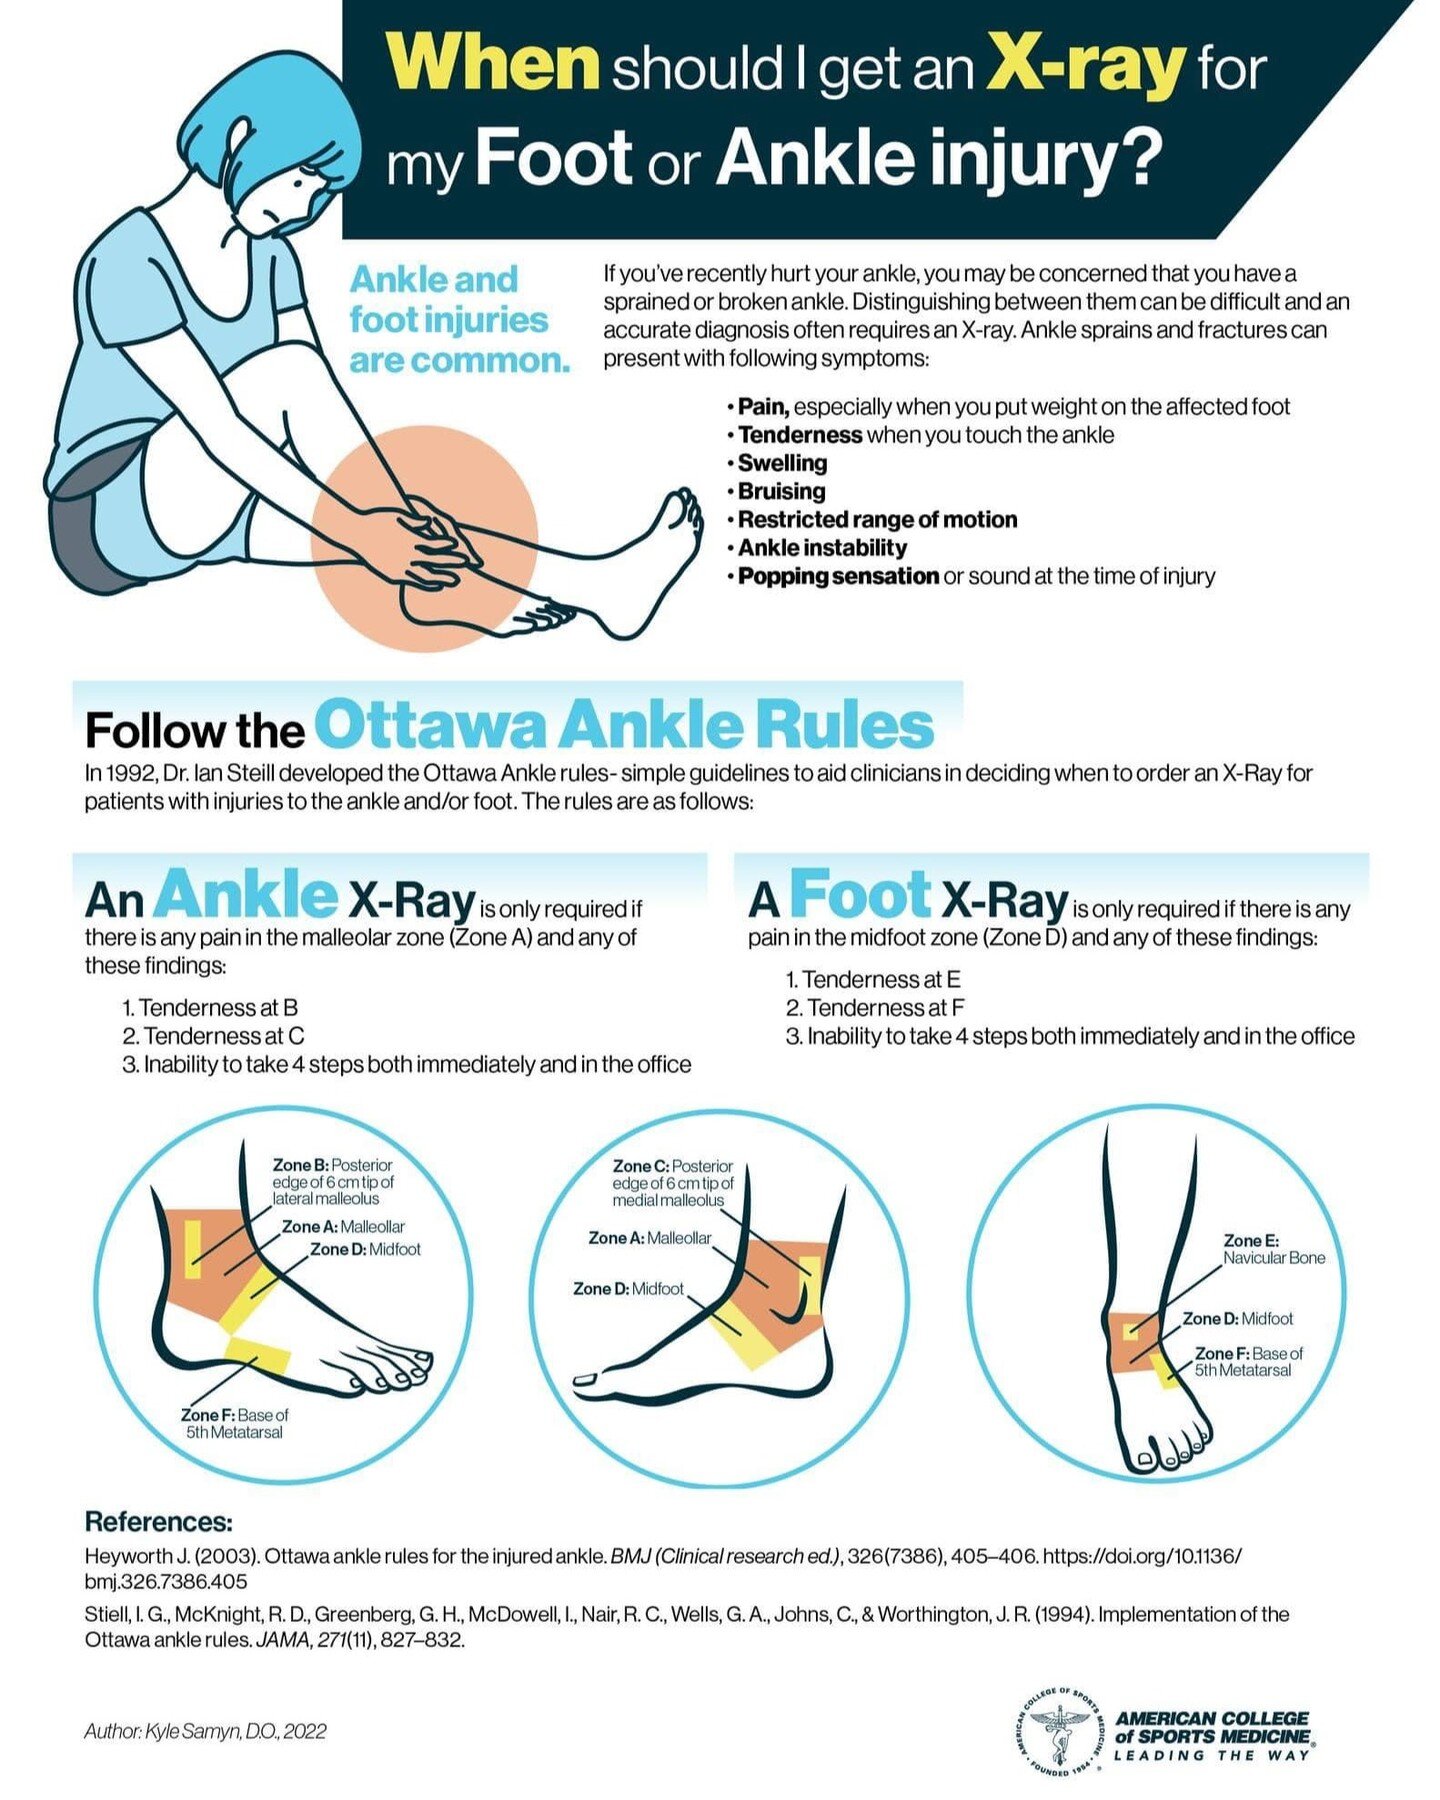 Ankle sprains are the most common causes of acute injury across a wide range of sports. How does a #sportsphysio know when you need an X-ray to make sure someone hasn't fractured their ankle rather than sprained a #ligament? We use the Ottawa Rules!
